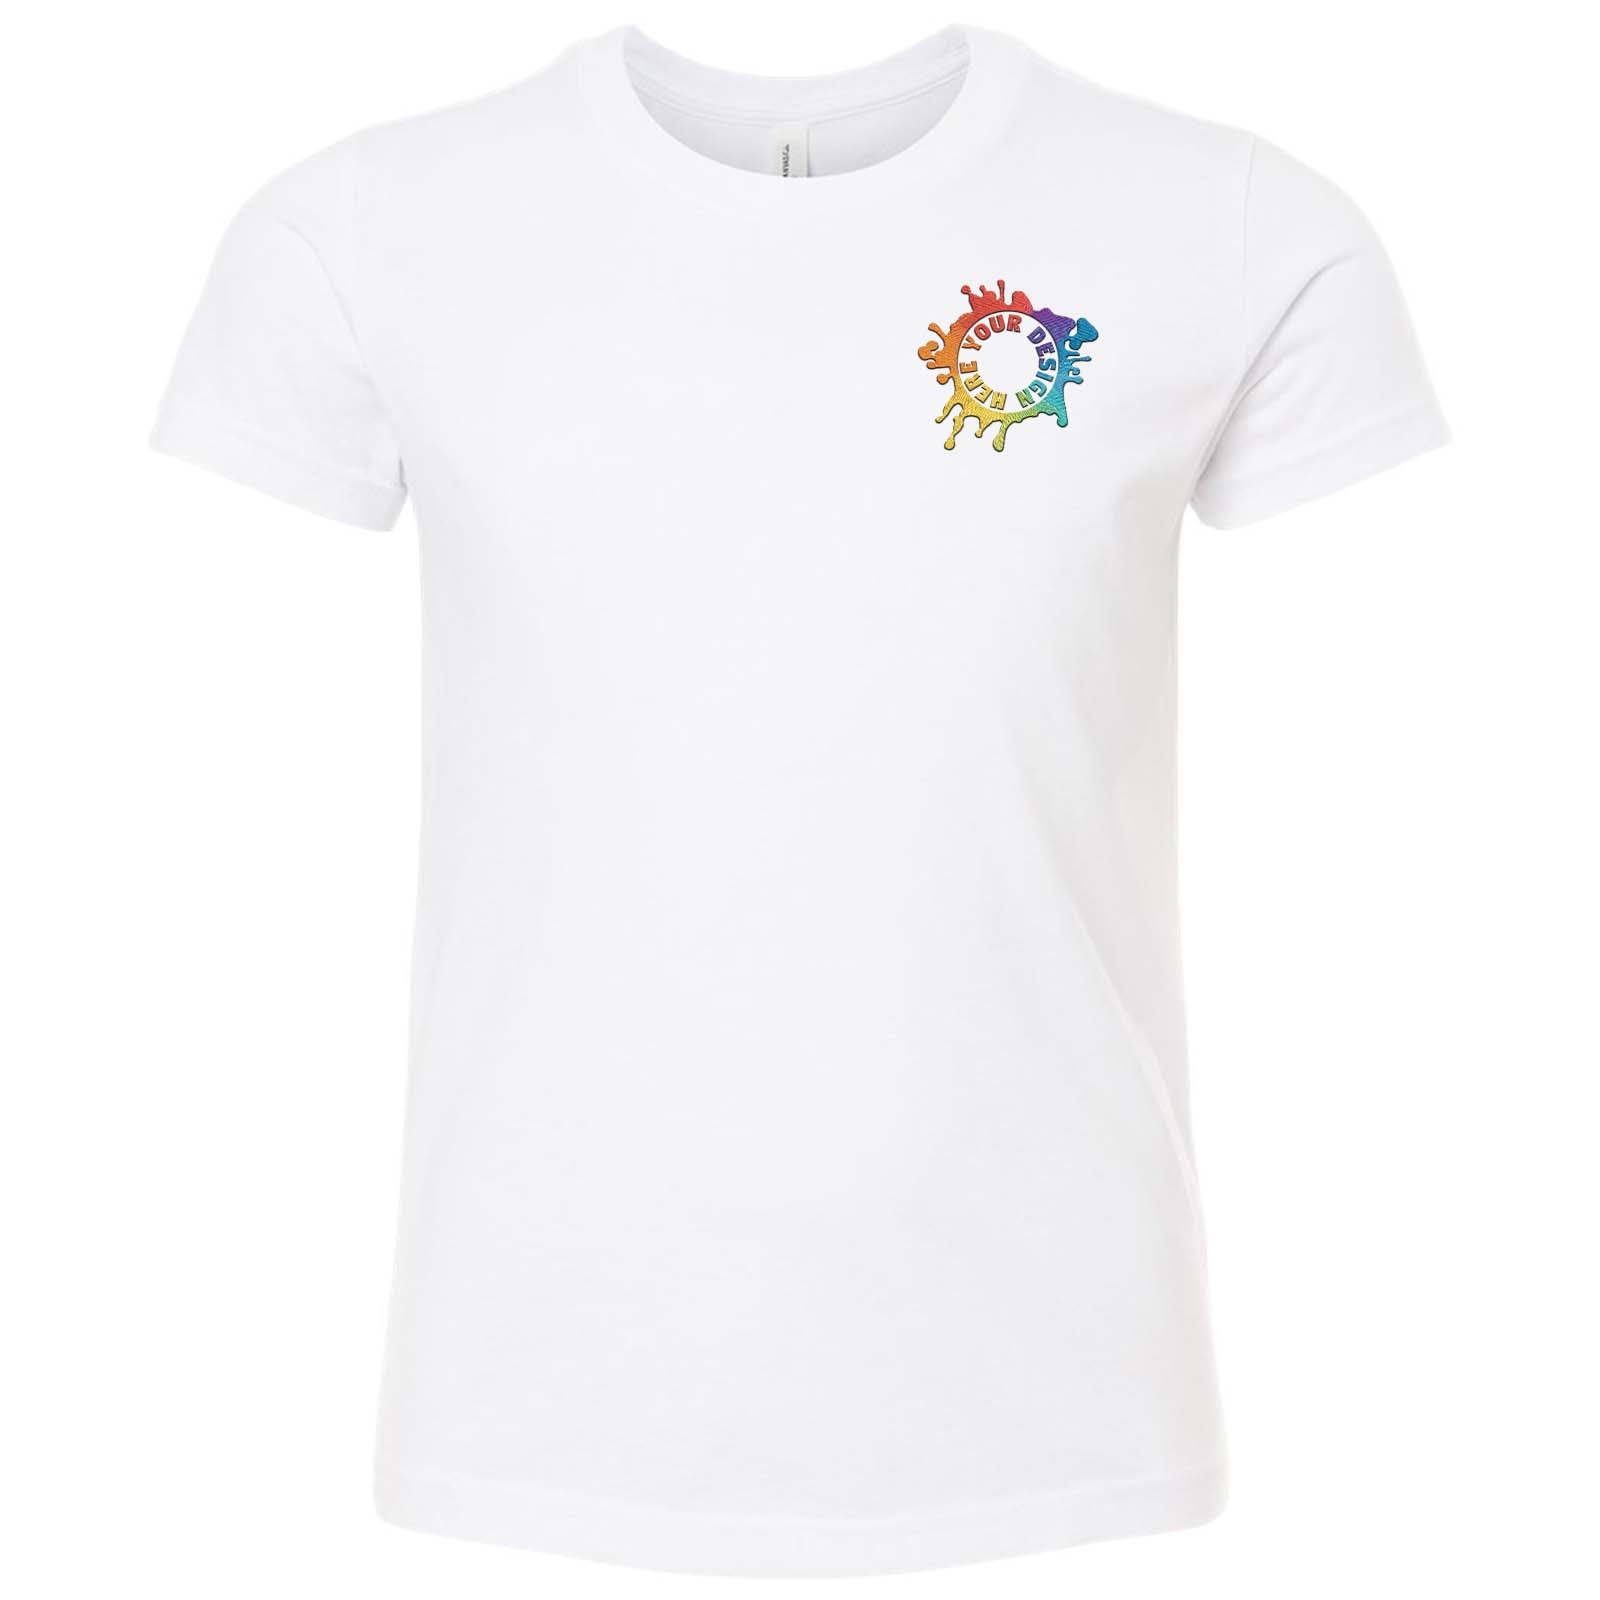 Bella + Canvas Youth Unisex Cotton/Polyester Blend T-Shirt Embroidery - Mato & Hash